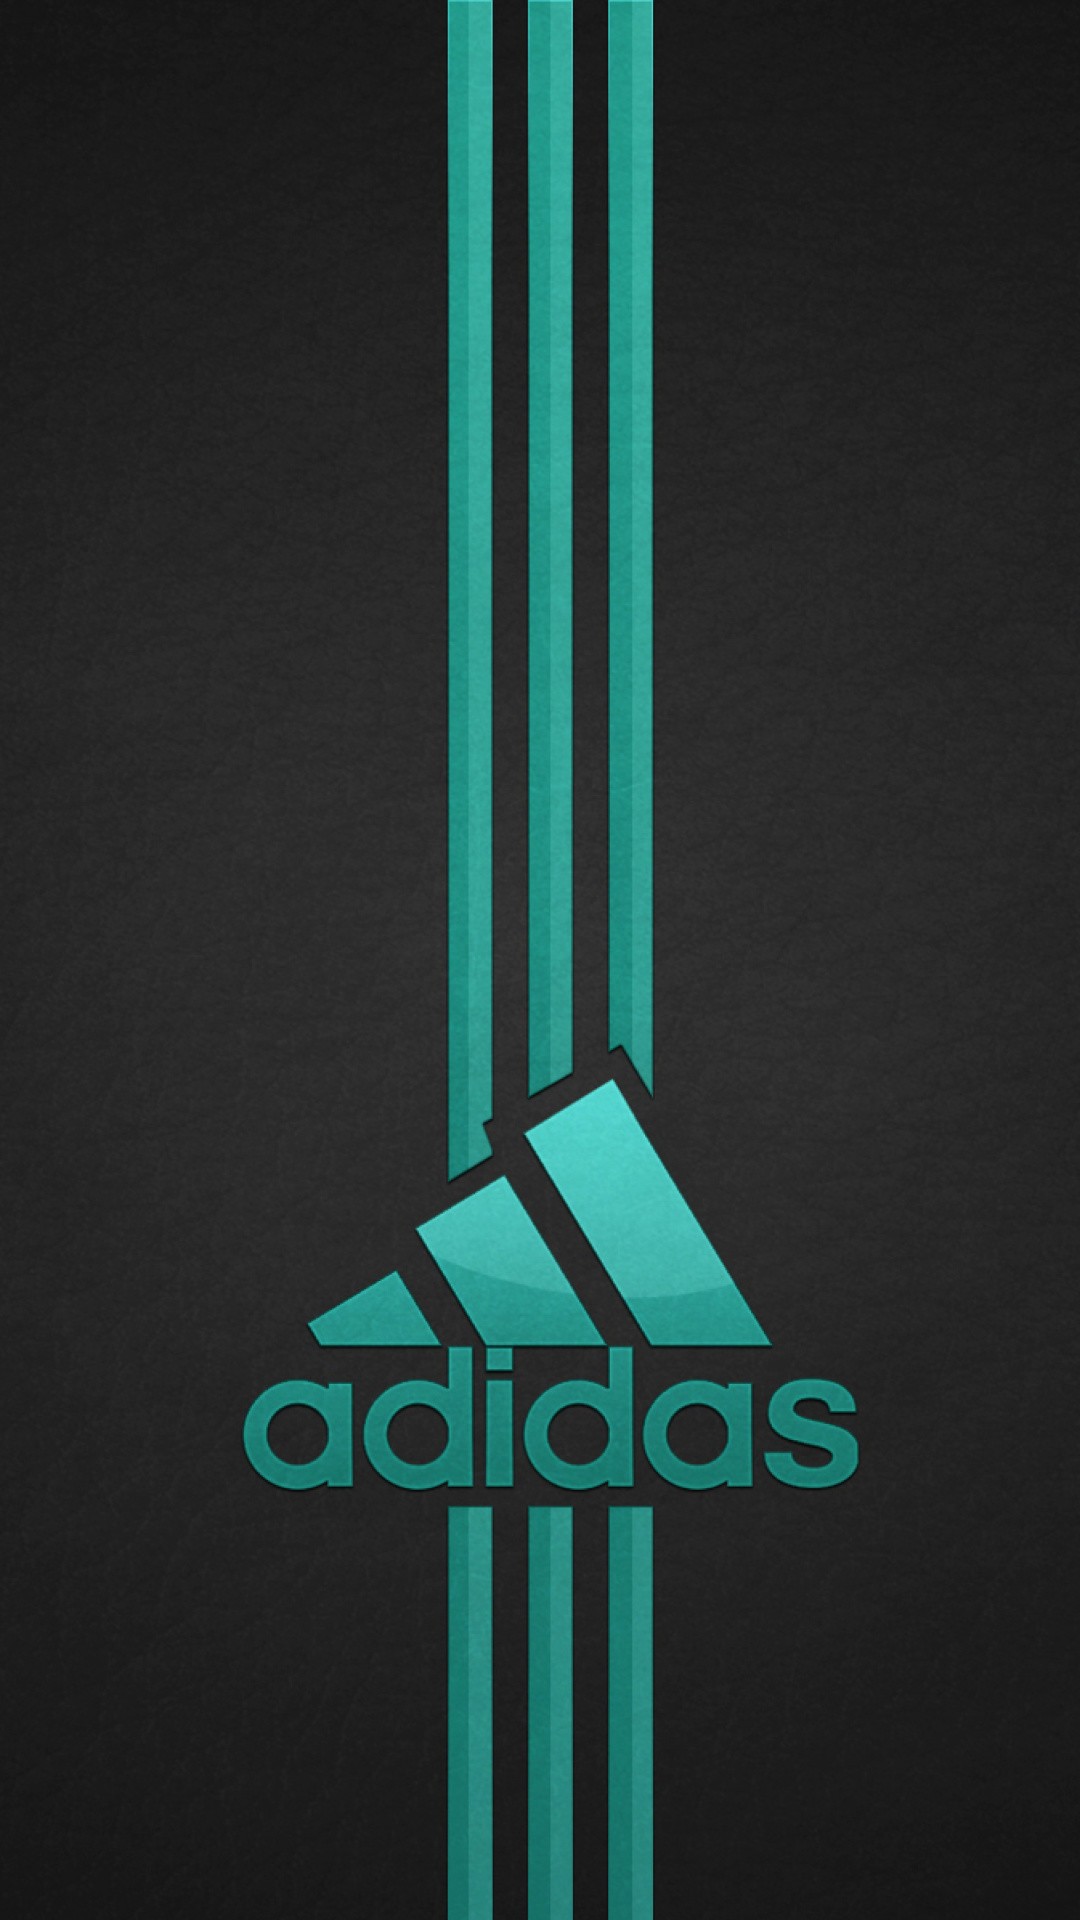 Adidas Wallpaper For Phone HD with high-resolution 1080x1920 pixel. Download all Mobile Wallpapers and Use them as wallpapers for your iPhone, Tablet, iPad, Android and other mobile devices